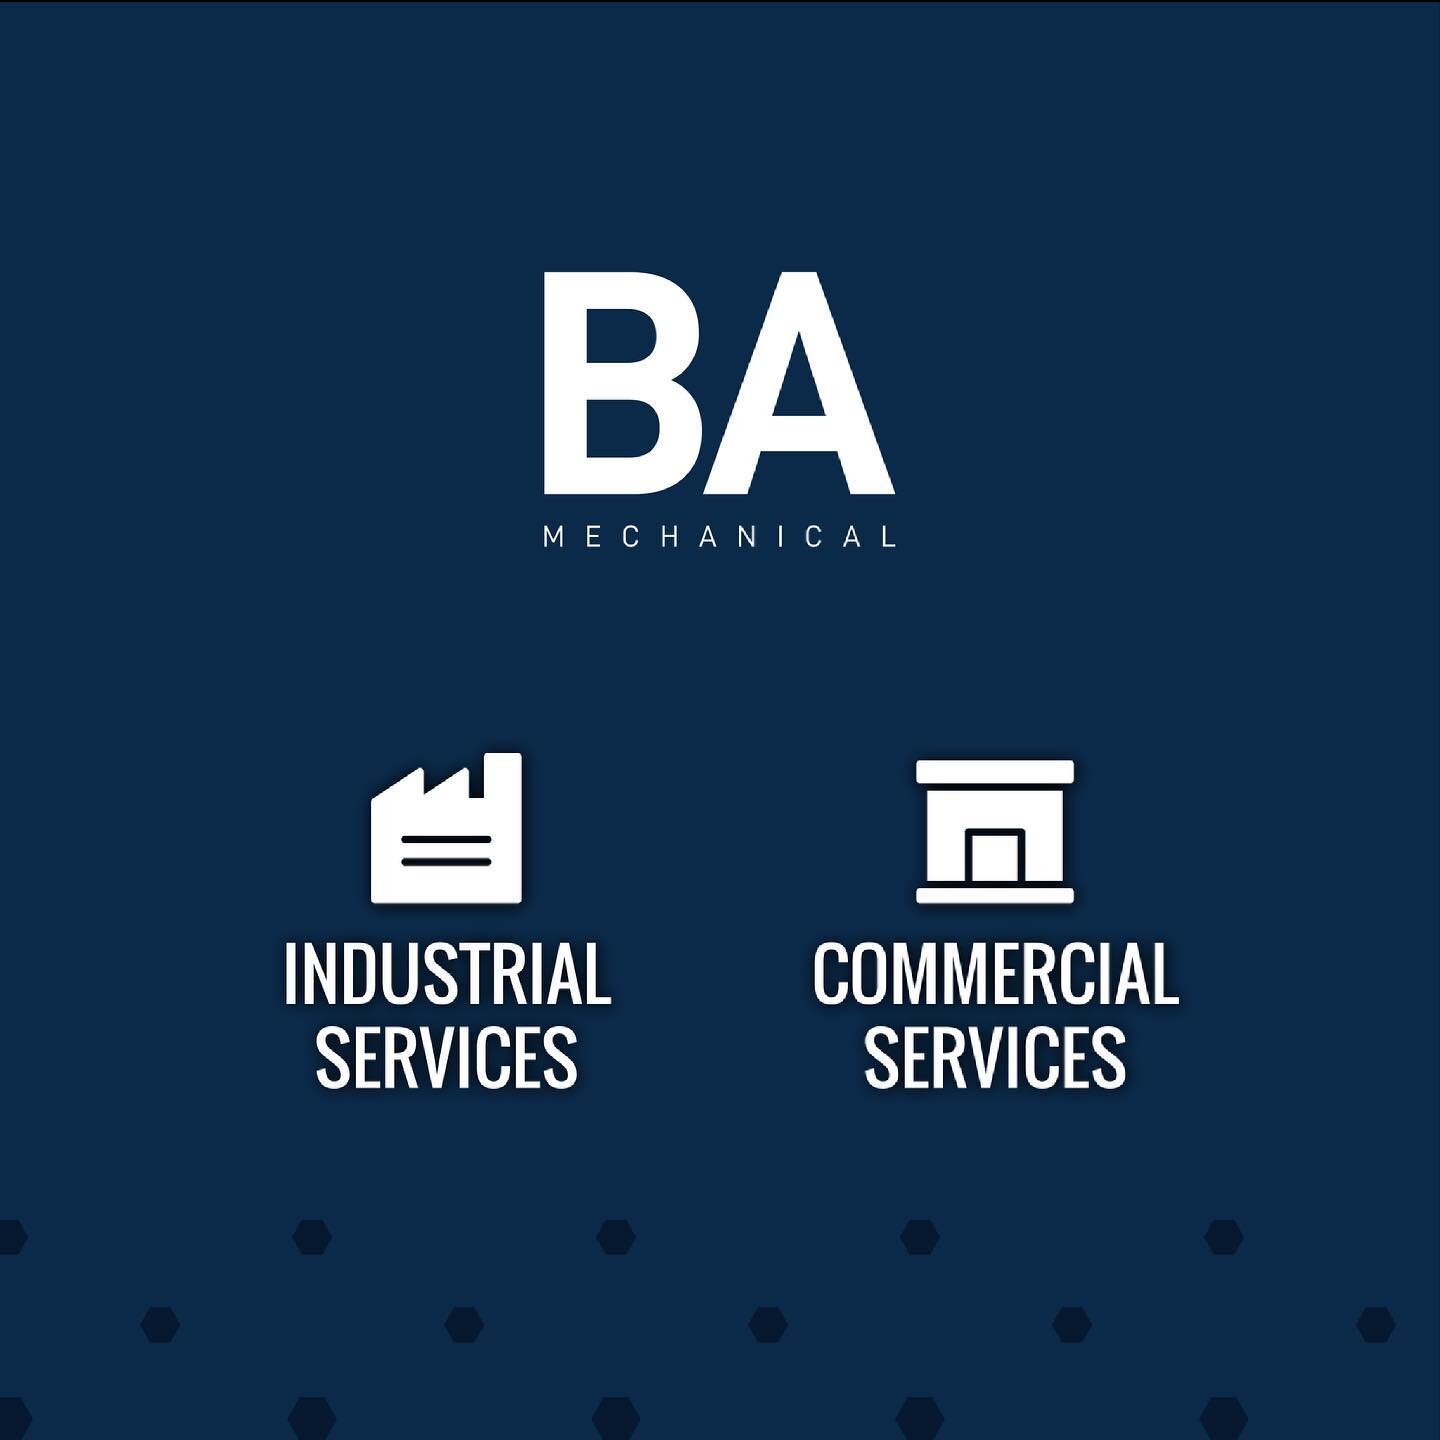 🔥 🧊 Our bold new website is LIVE! 
Follow our link in bio to see our full list of services, how to work with us and get a FREE quote.
.
.
.
.
#BAmechanical #fairburnga #gettheboldexperience #hvacservice #hvactechnician #hvacinstall #hvaccontractor 